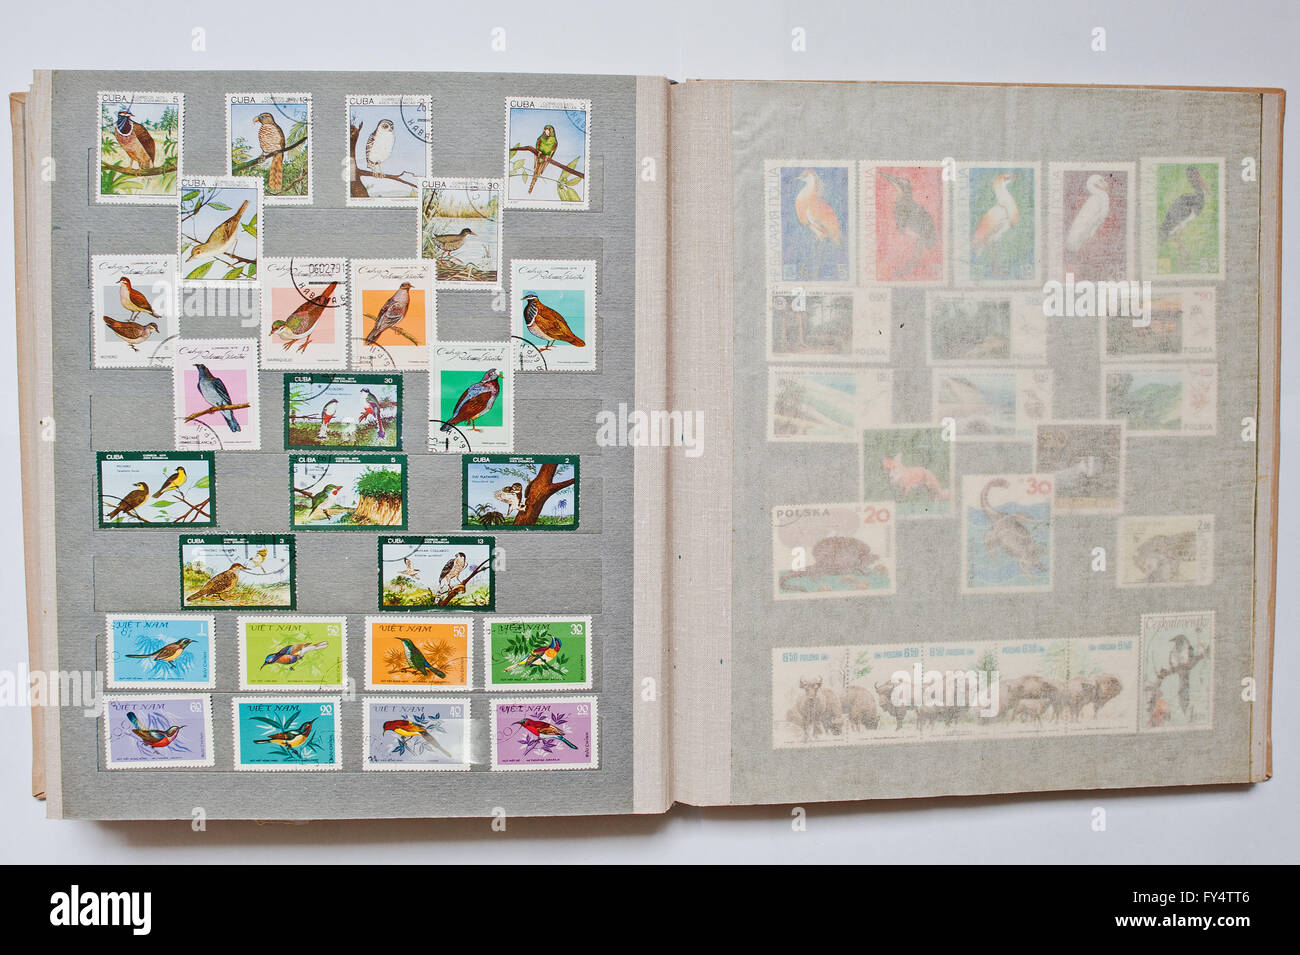 Collection of postage stamps in album from Cuba and Vietnam Stock Photo